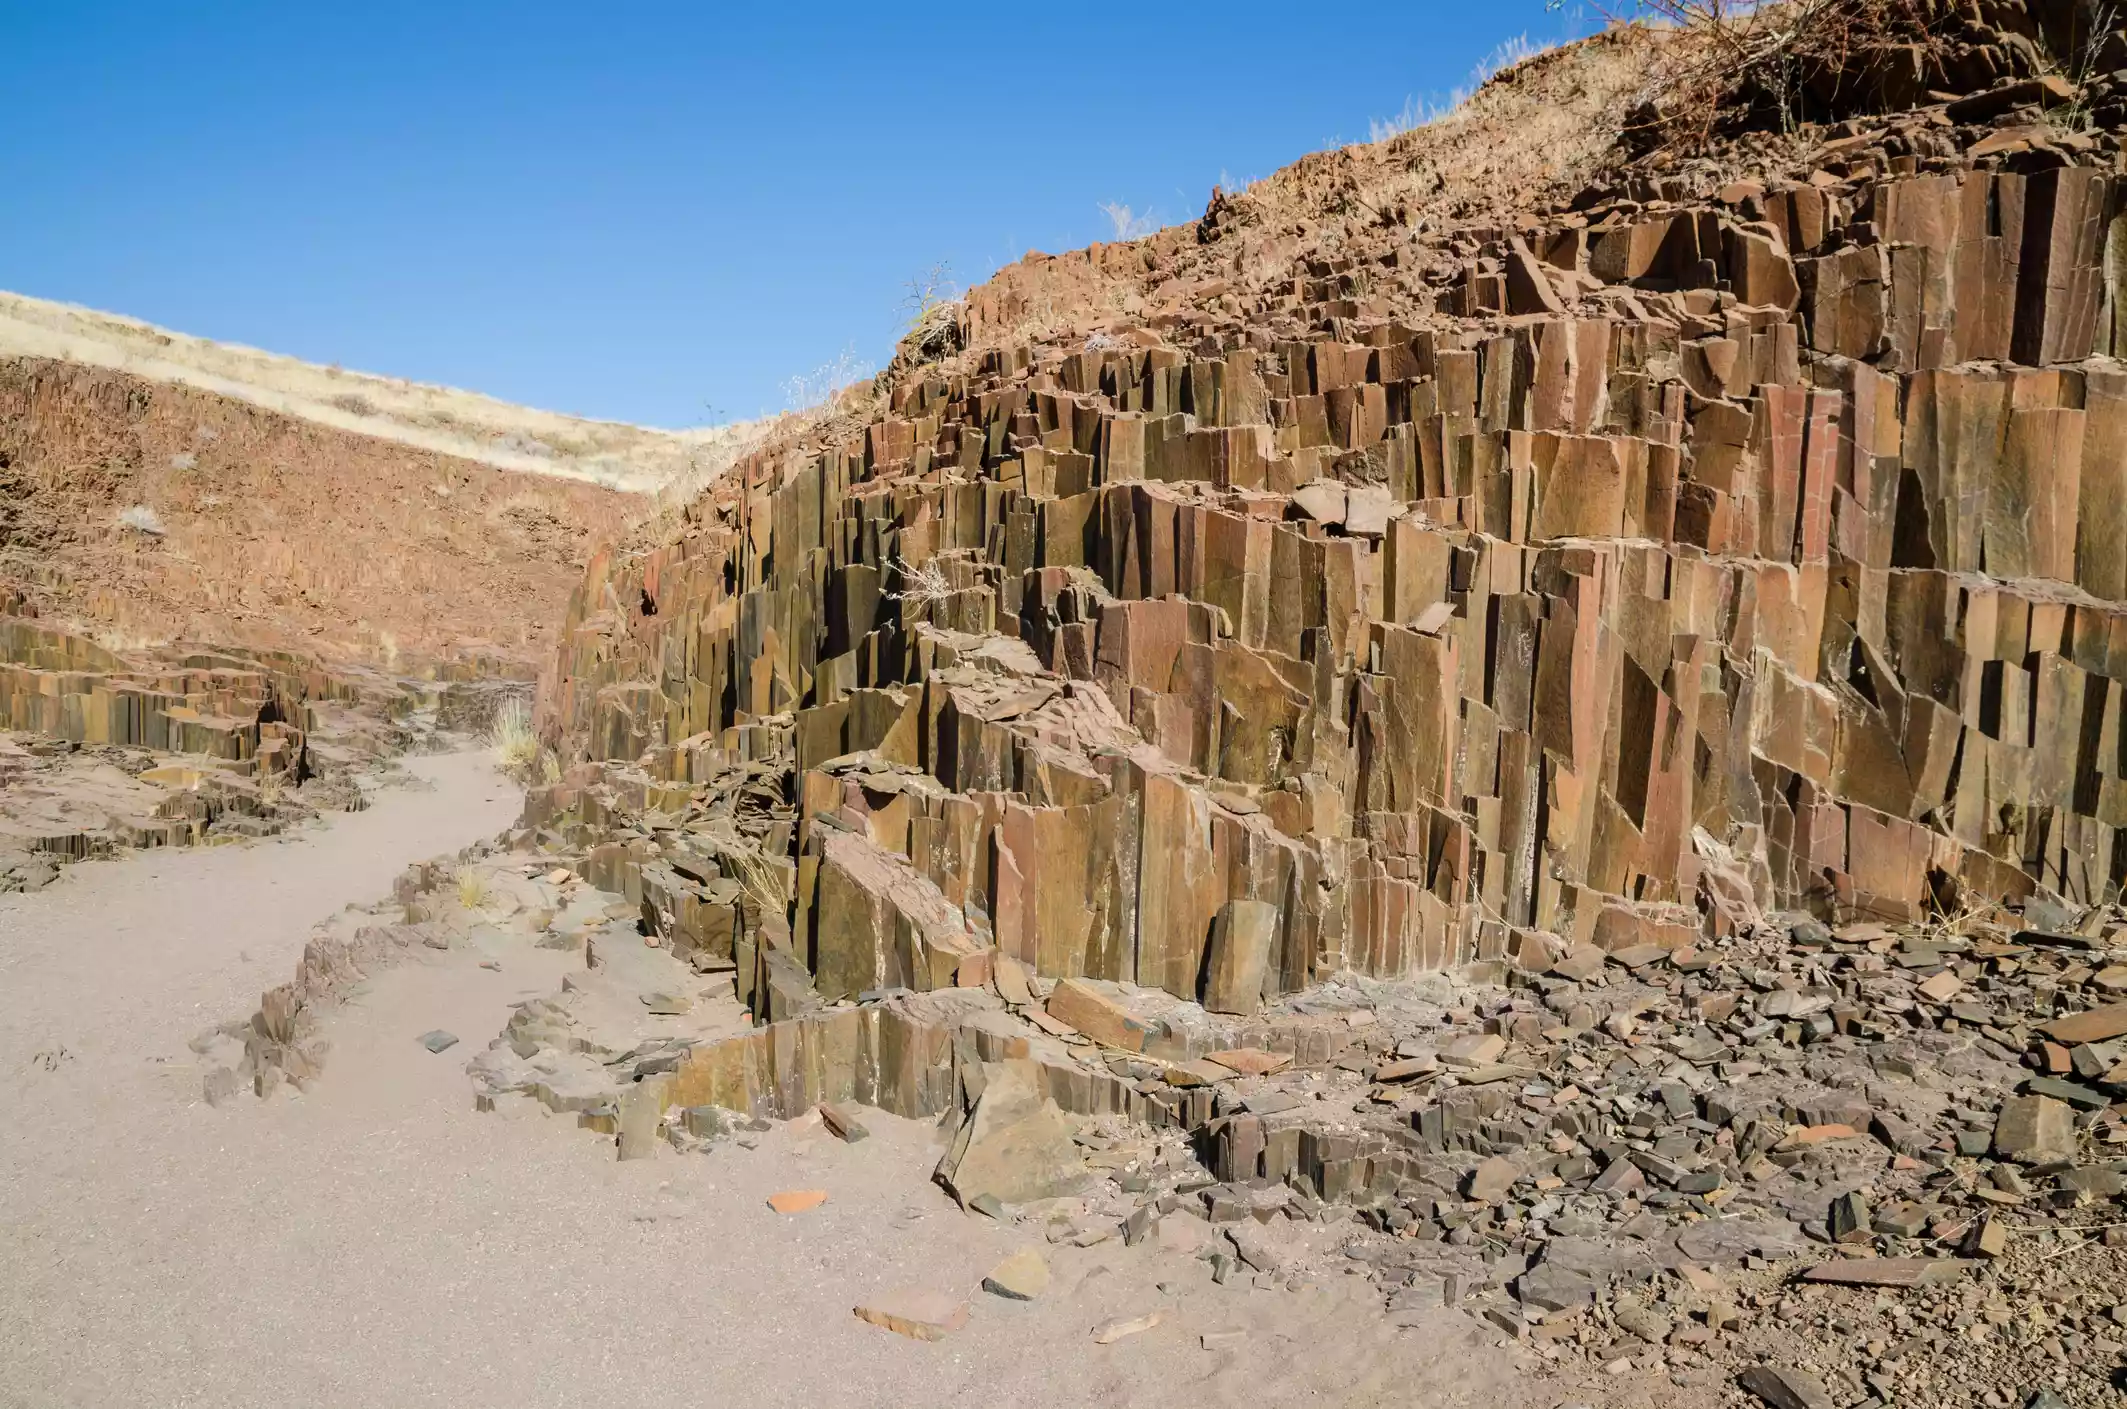 Red basalt columns resembling organ pipes against clear sky